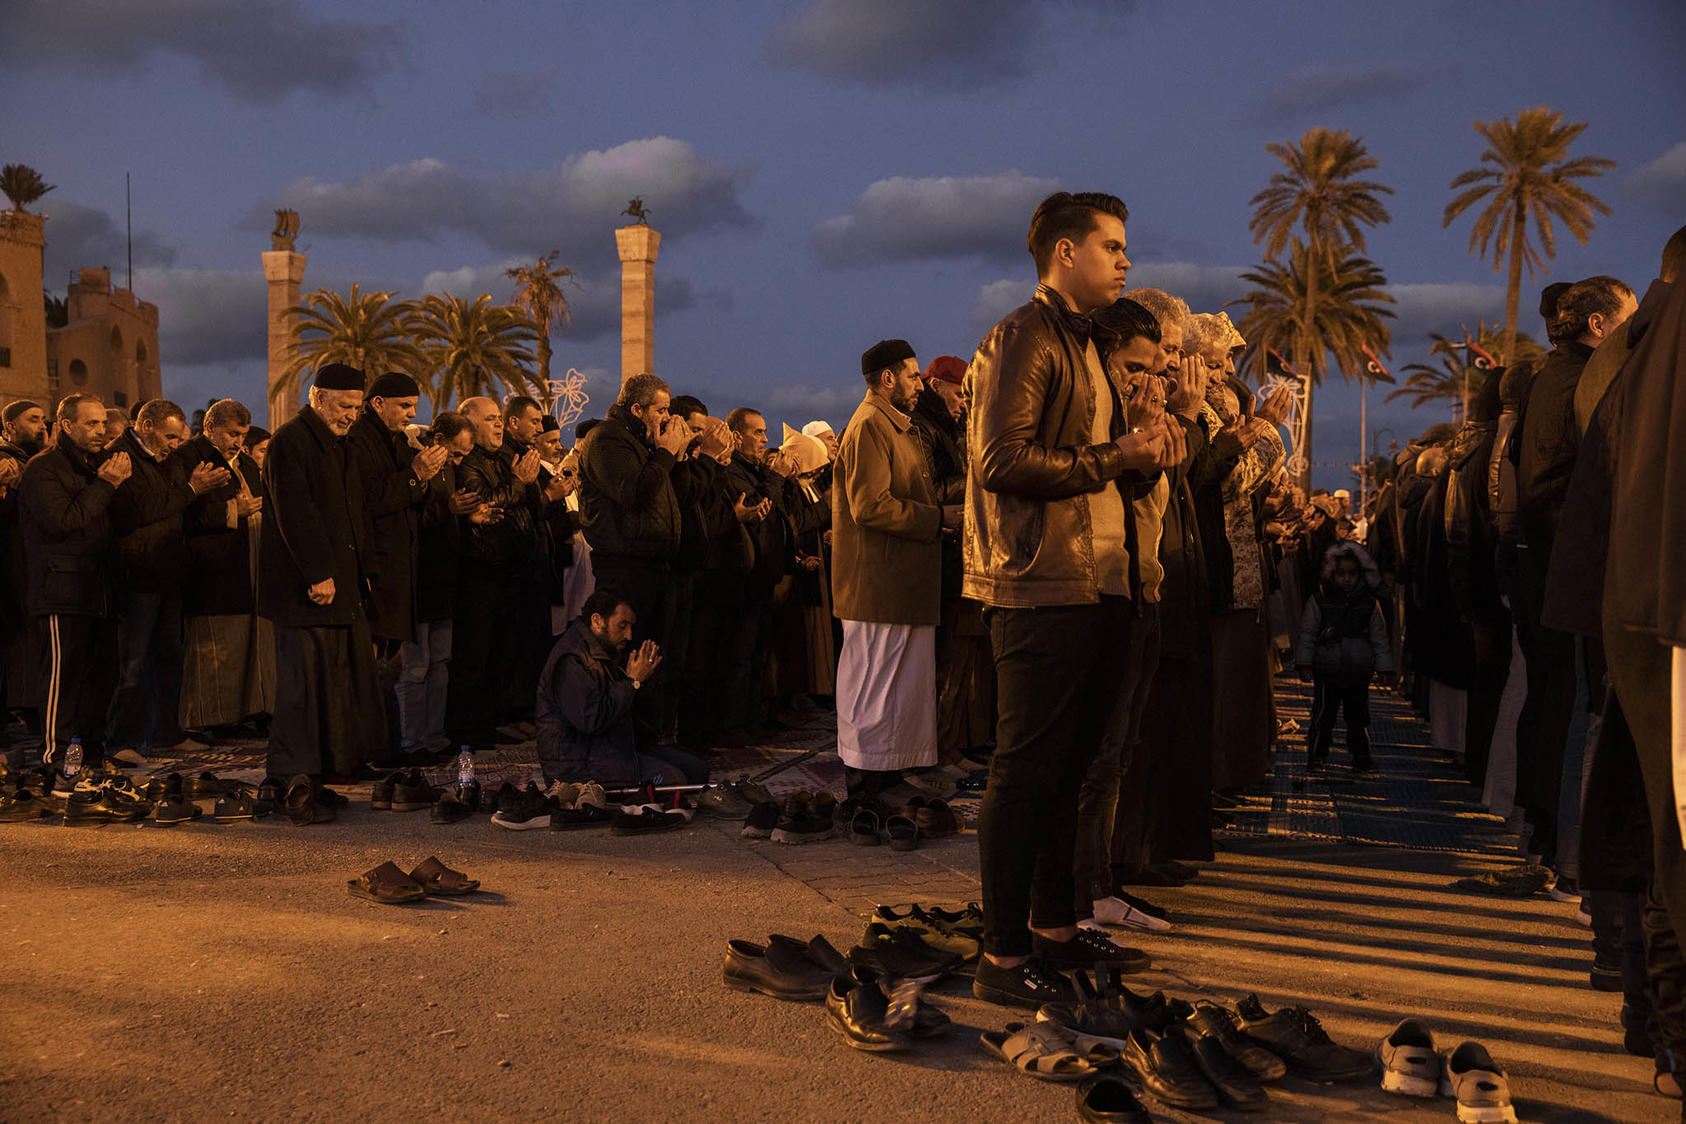 Libyans pray in Martyrs’ Square in the country’s capital, Tripoli, Jan. 17, 2020. (Ivor Prickett/The New York Times)